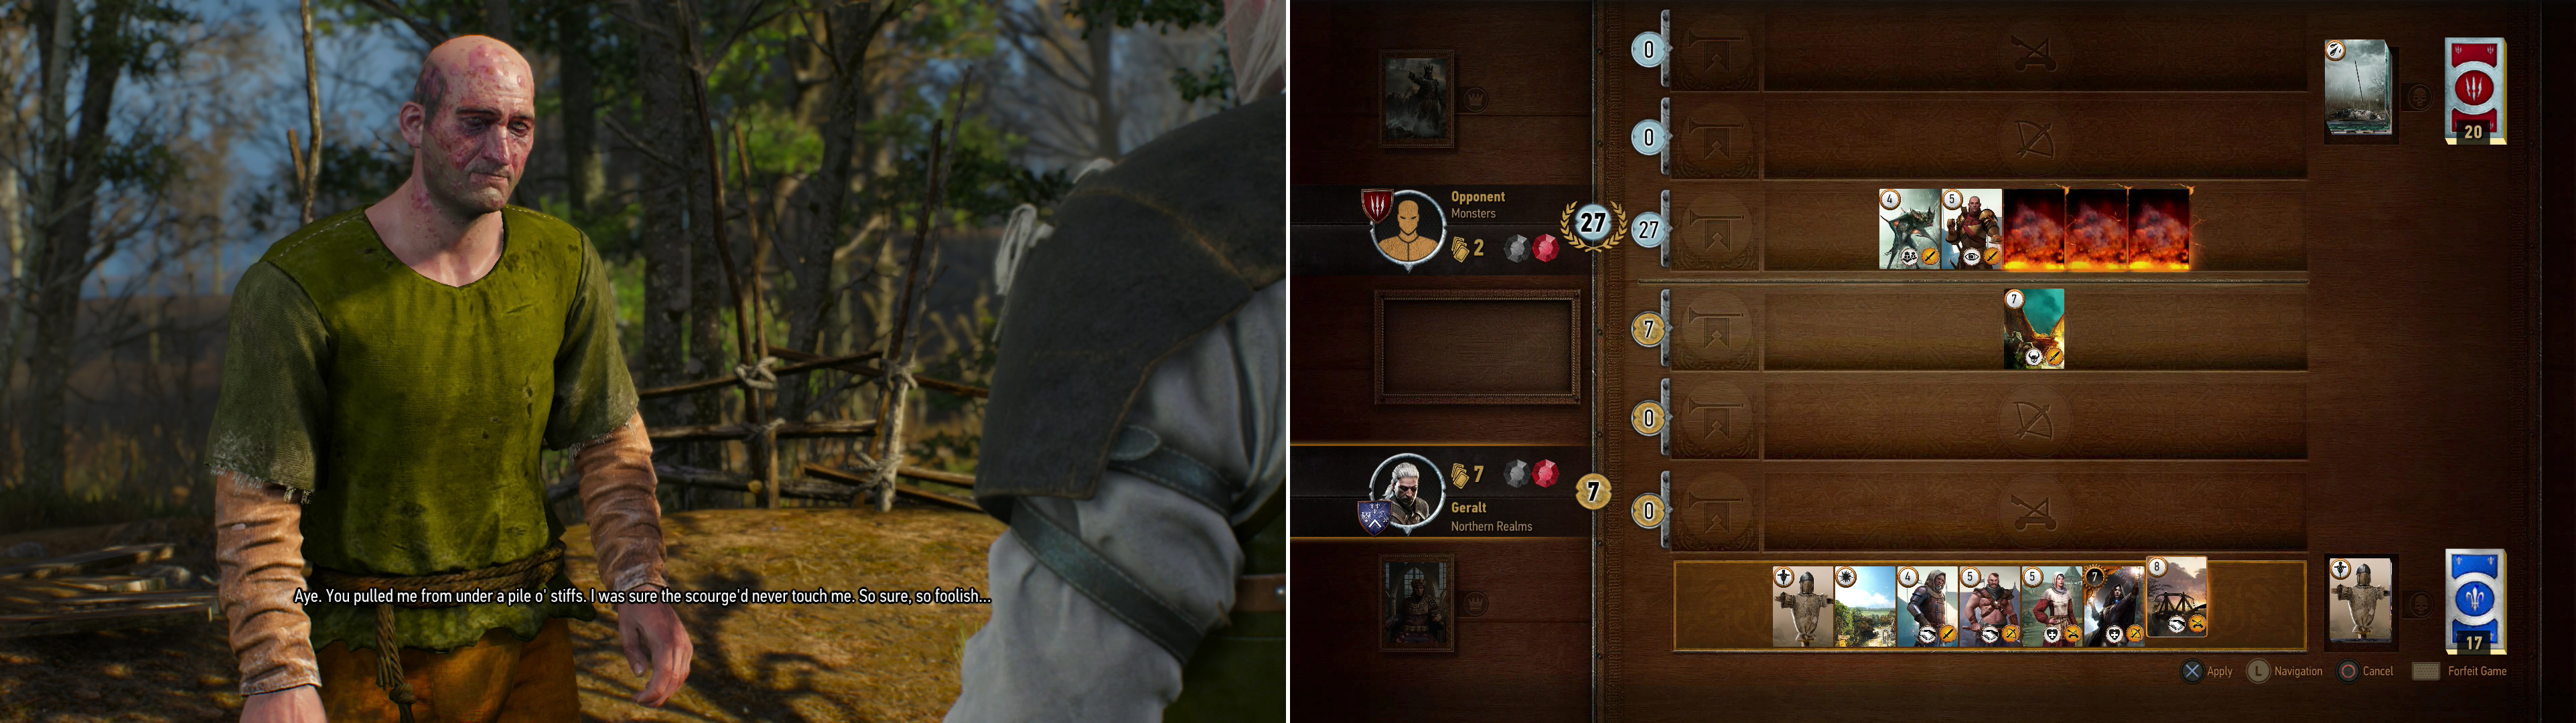 If you encountered him along the road earlier, old Gert can be found between the Nekker nests, apparently quite worse off for his corpse mishap earlier (left). You can use Vellentretenmerth to good effect against the Old Sage's Muster-heavy Monster deck (right).